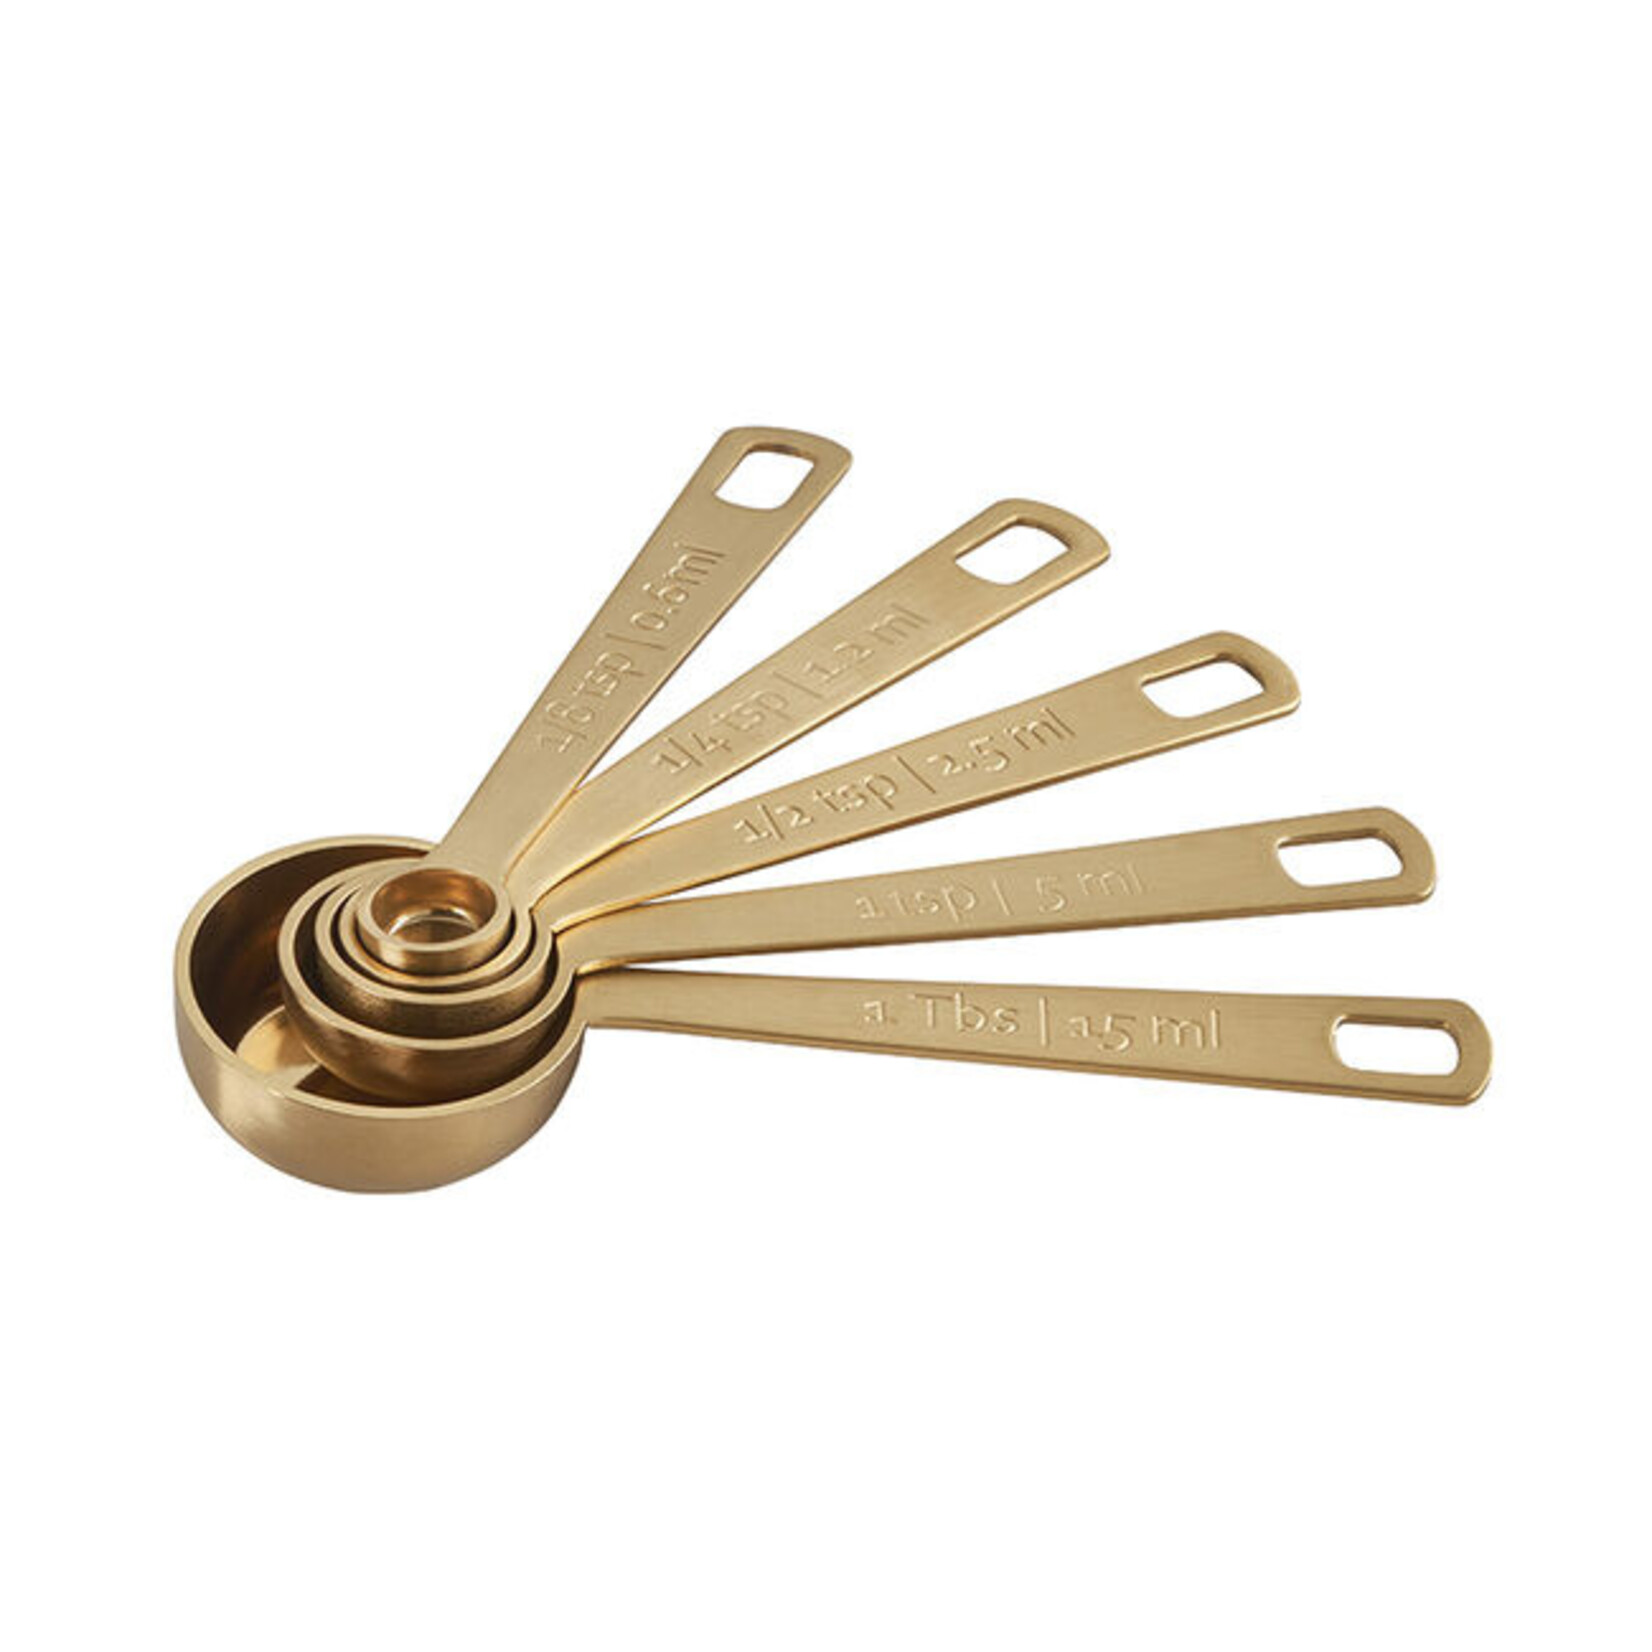 Le Creuset Gold Measuring Spoons, S/5